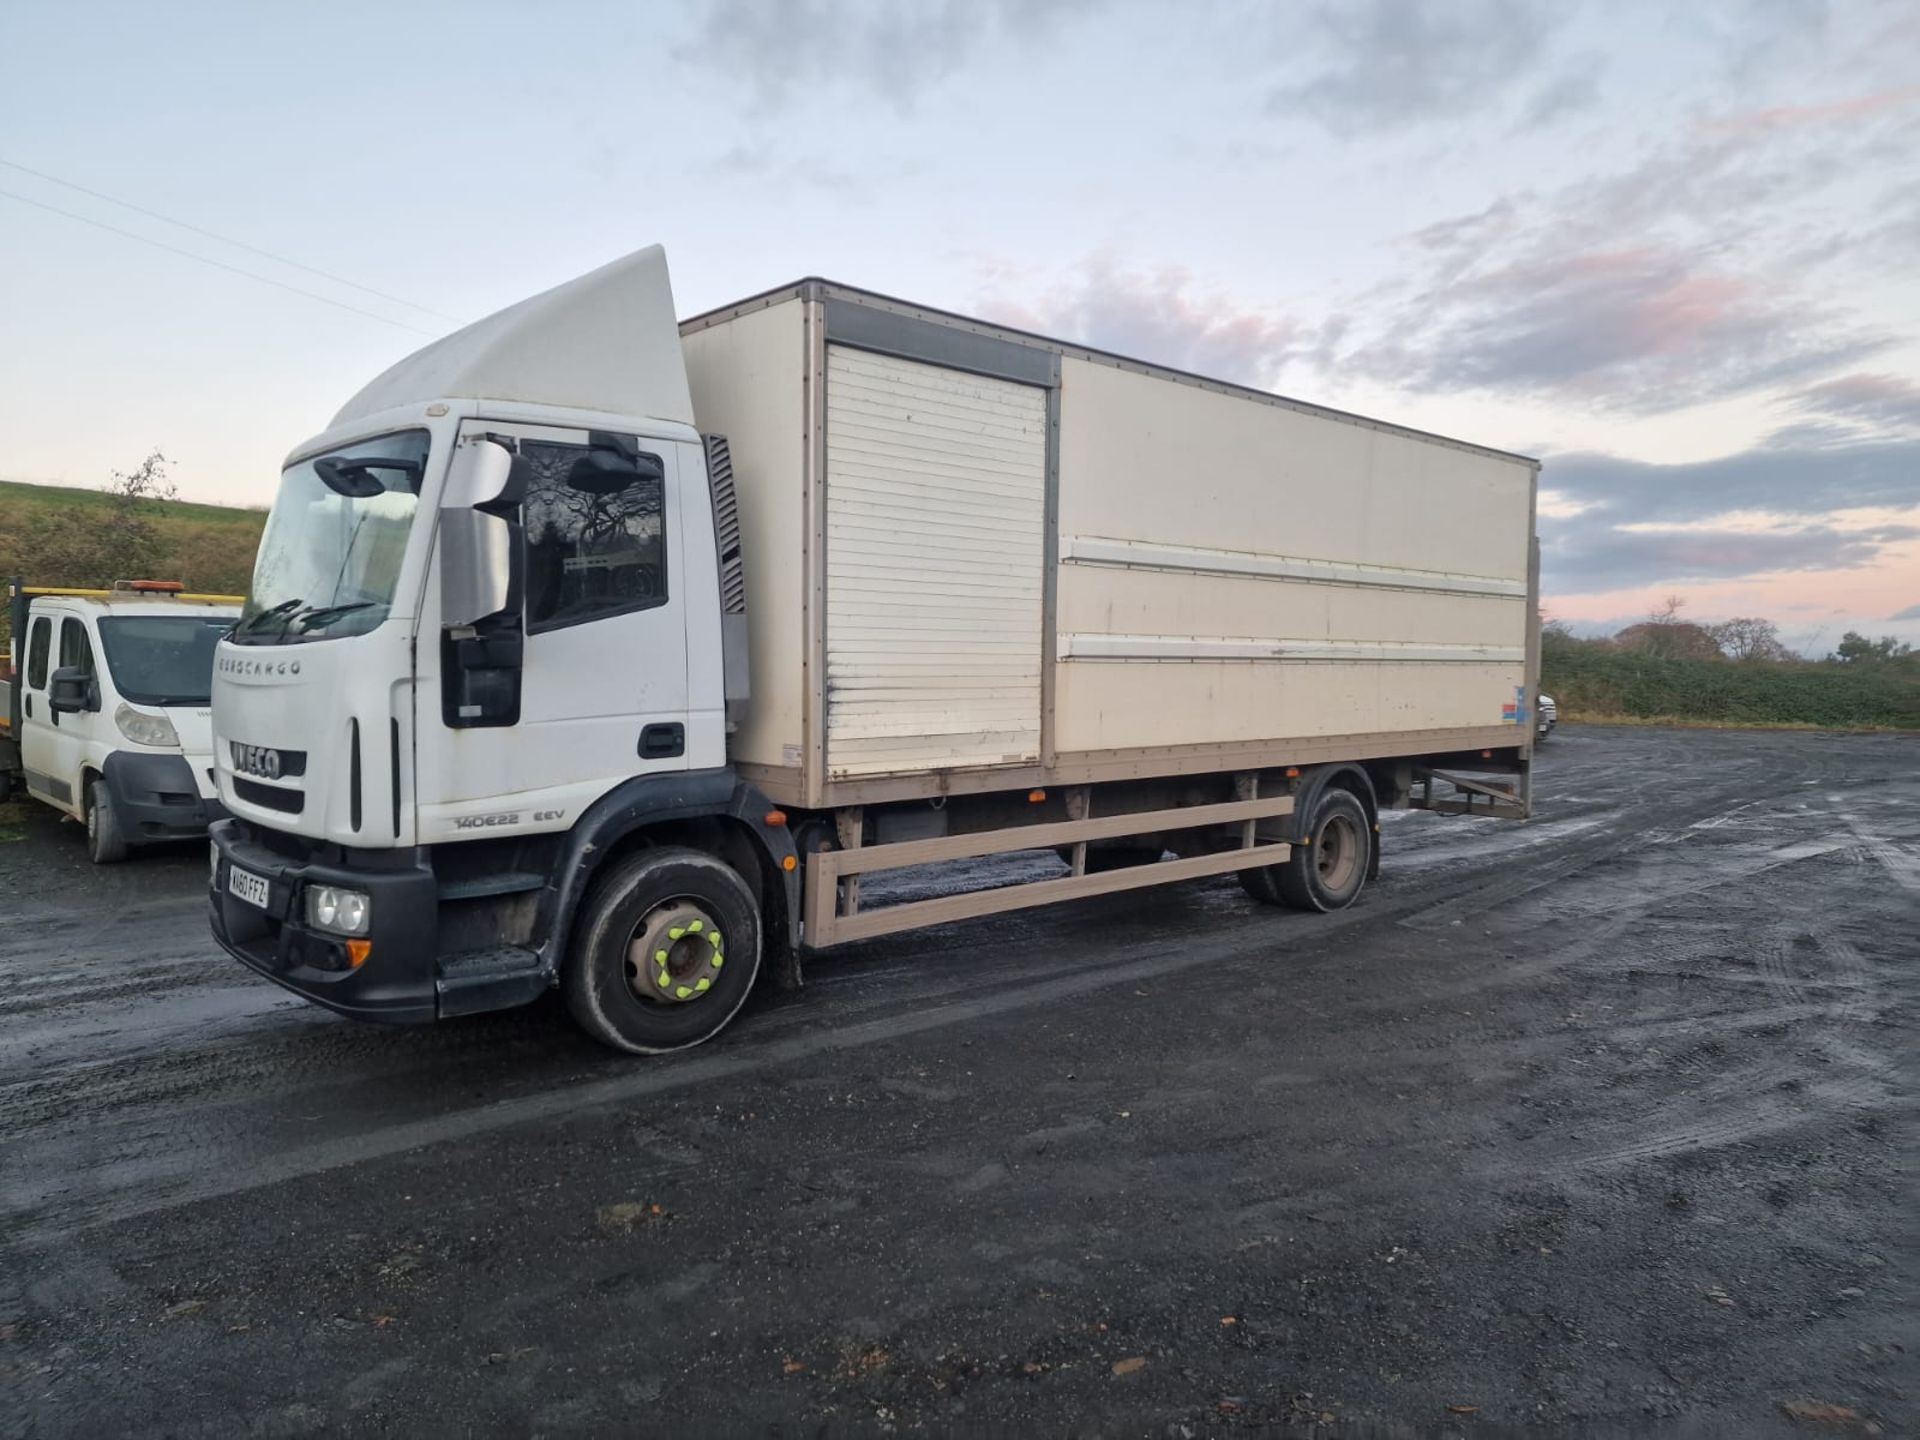 10/60 IVECO EUROCARGO (MY 2008) - 5880cc 2dr Lorry (White) - Image 3 of 16